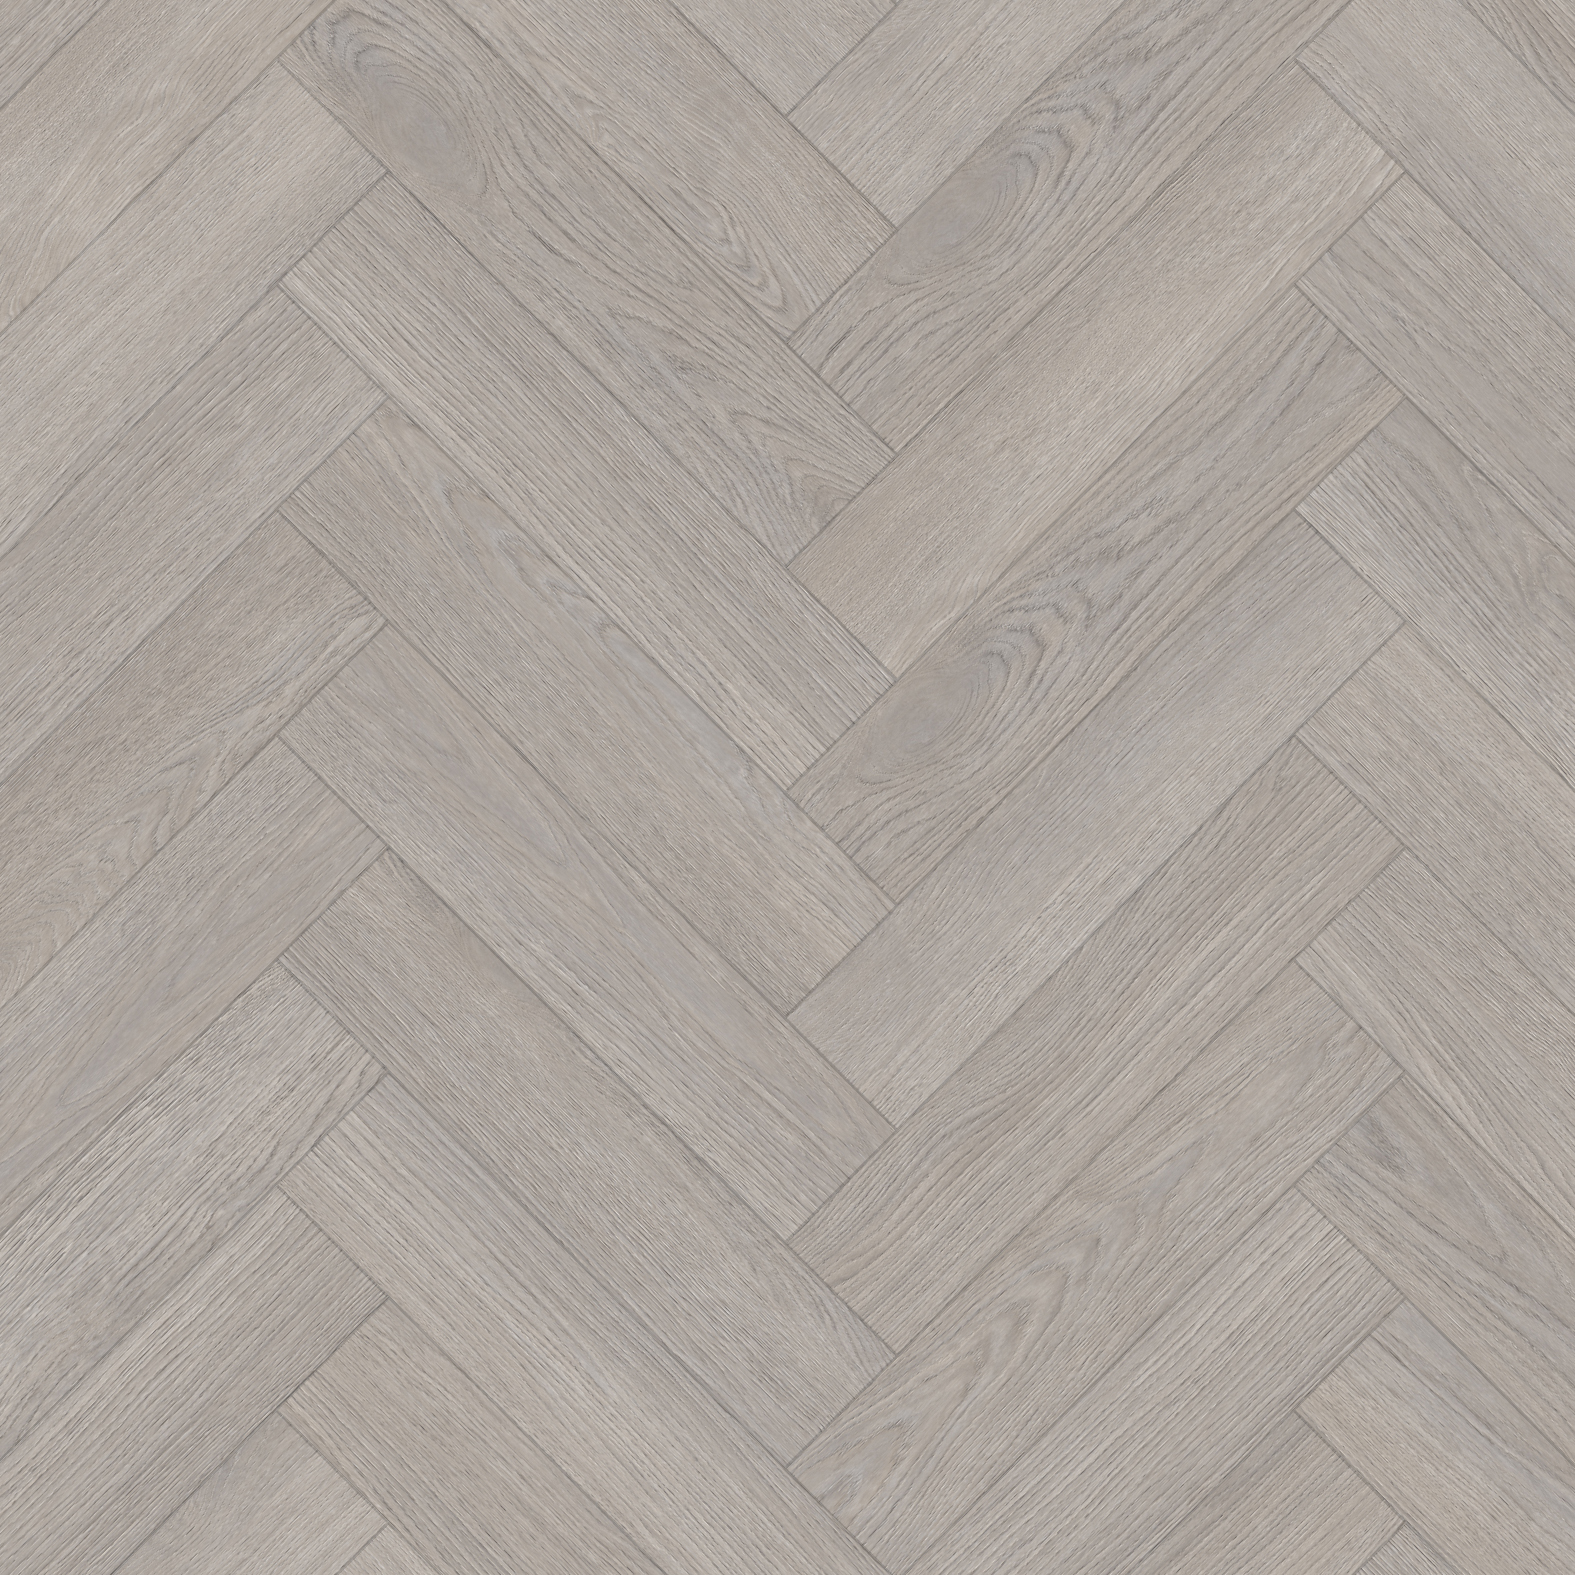 Chester Square Parquet LVT | SPECIAL OFFER